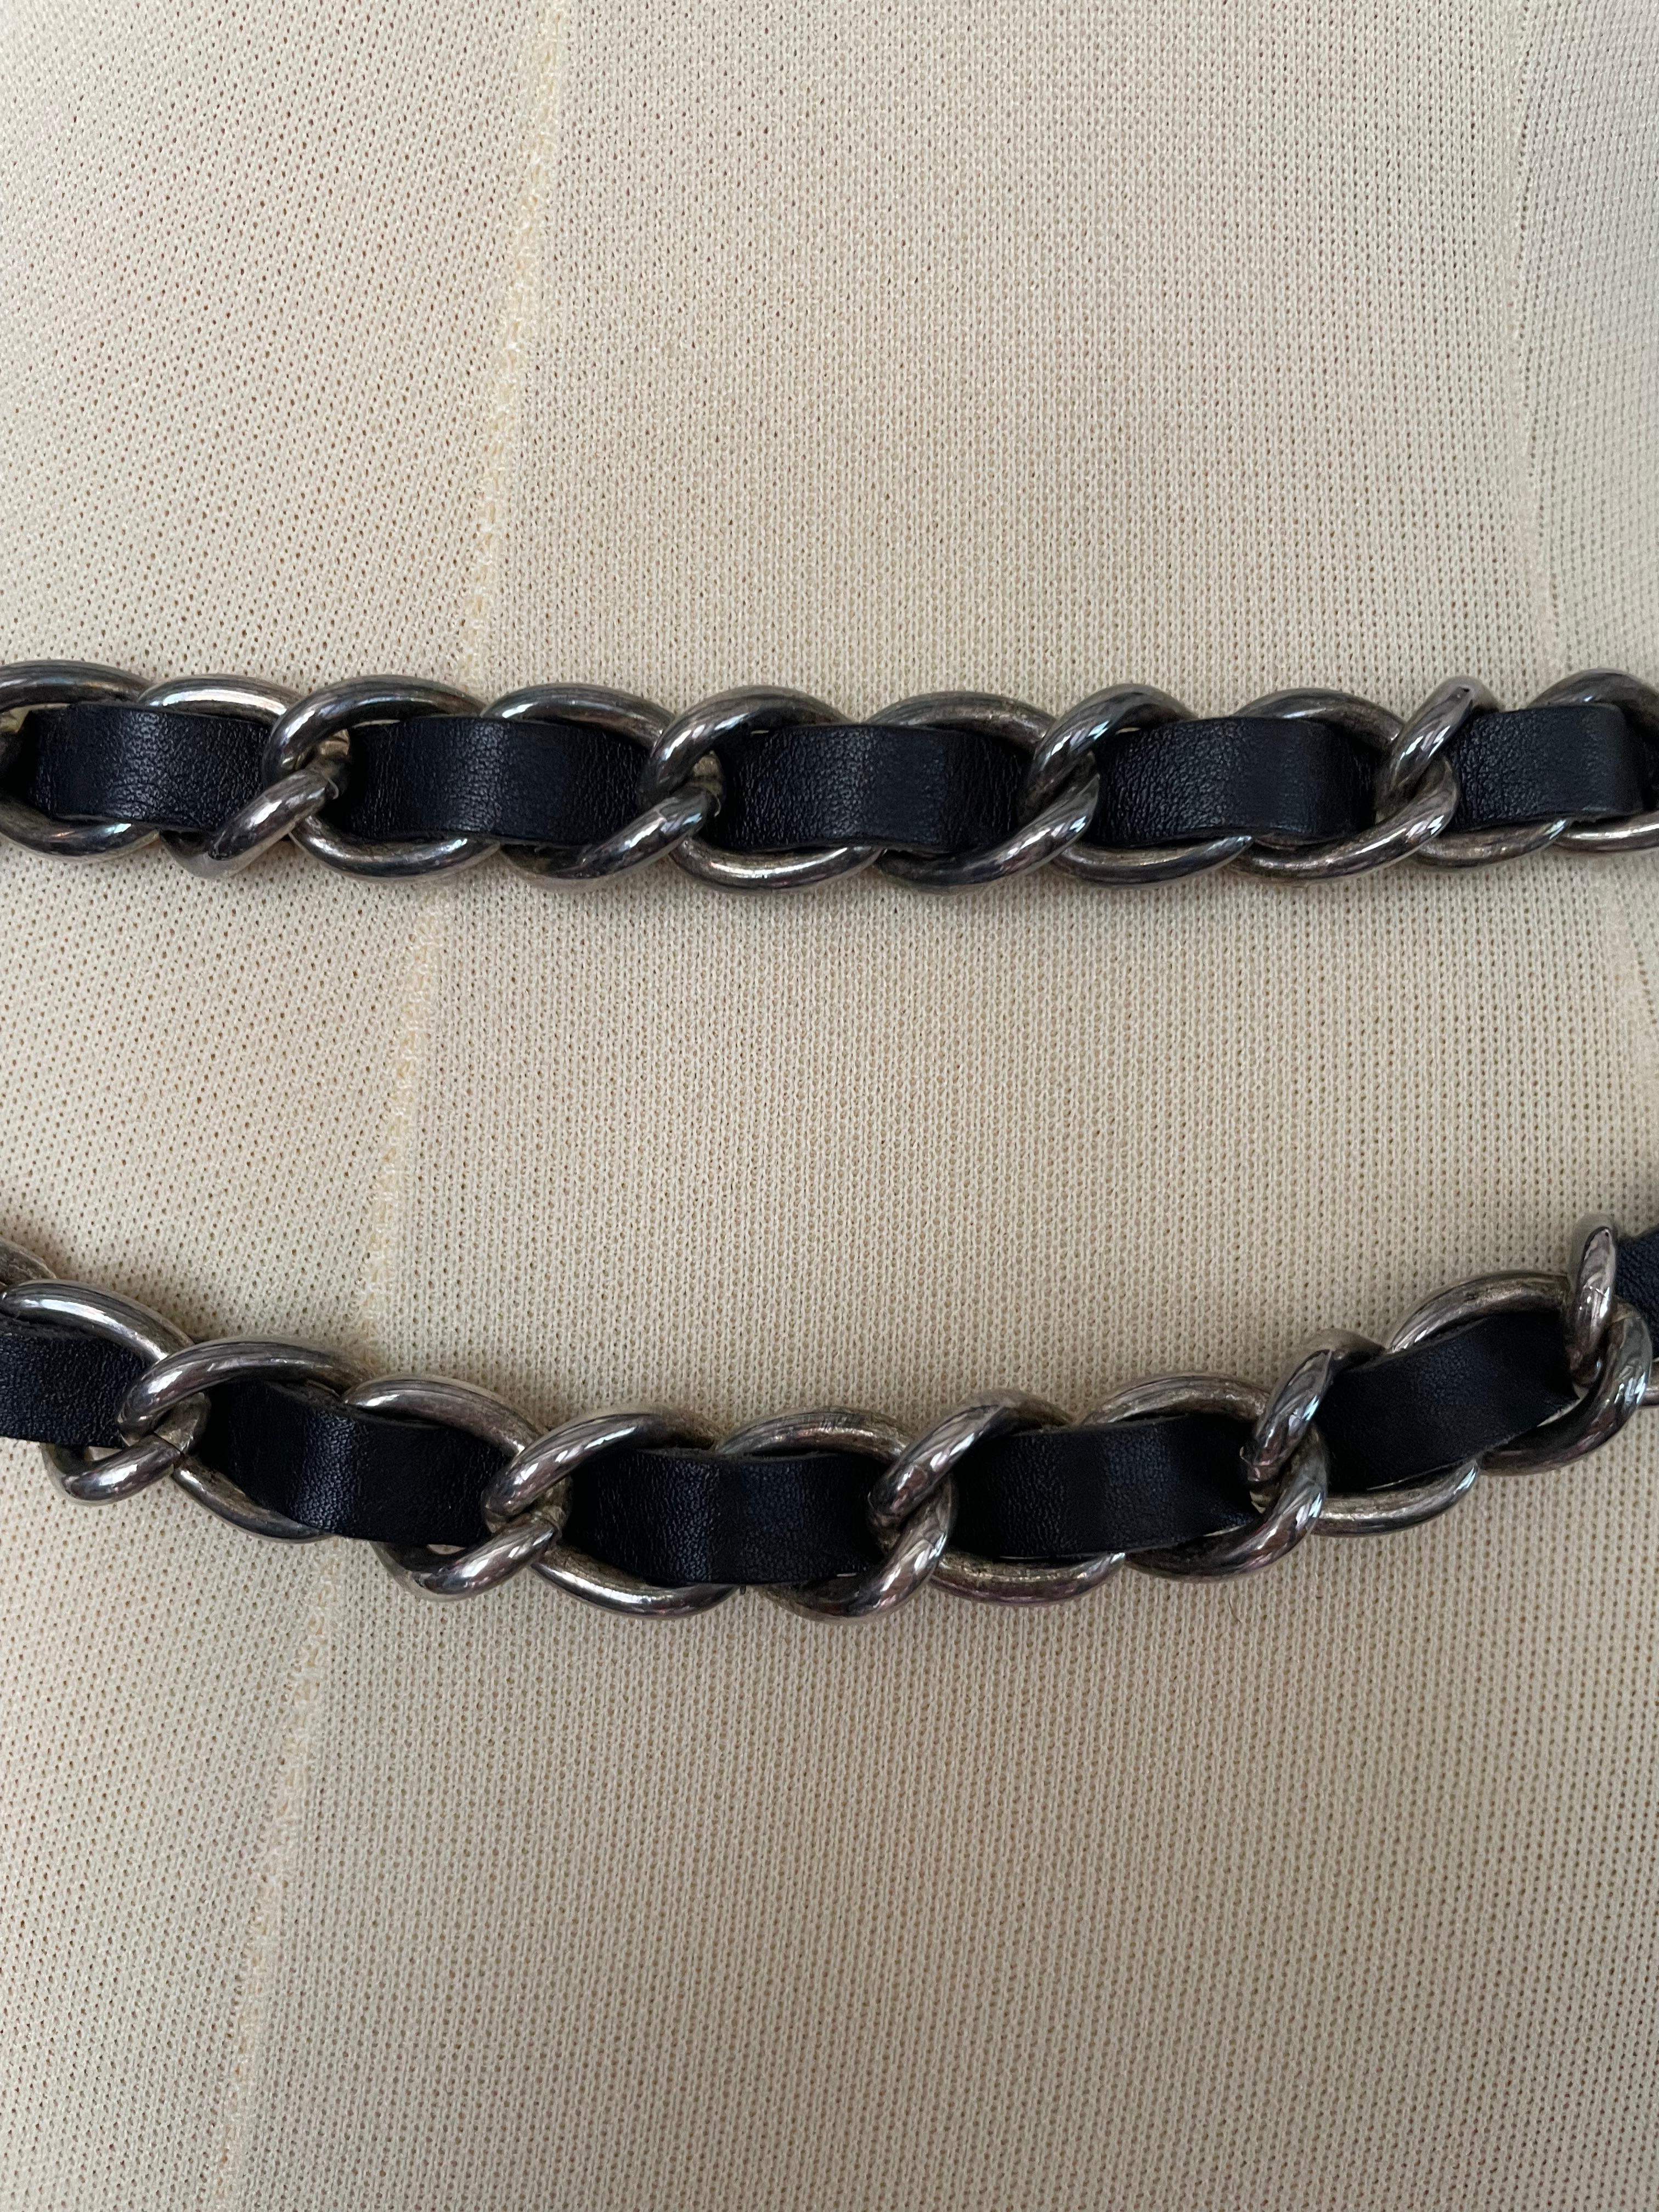 Chanel Silver Metal Belt Chain Black Leather Woven 1995 For Sale 2